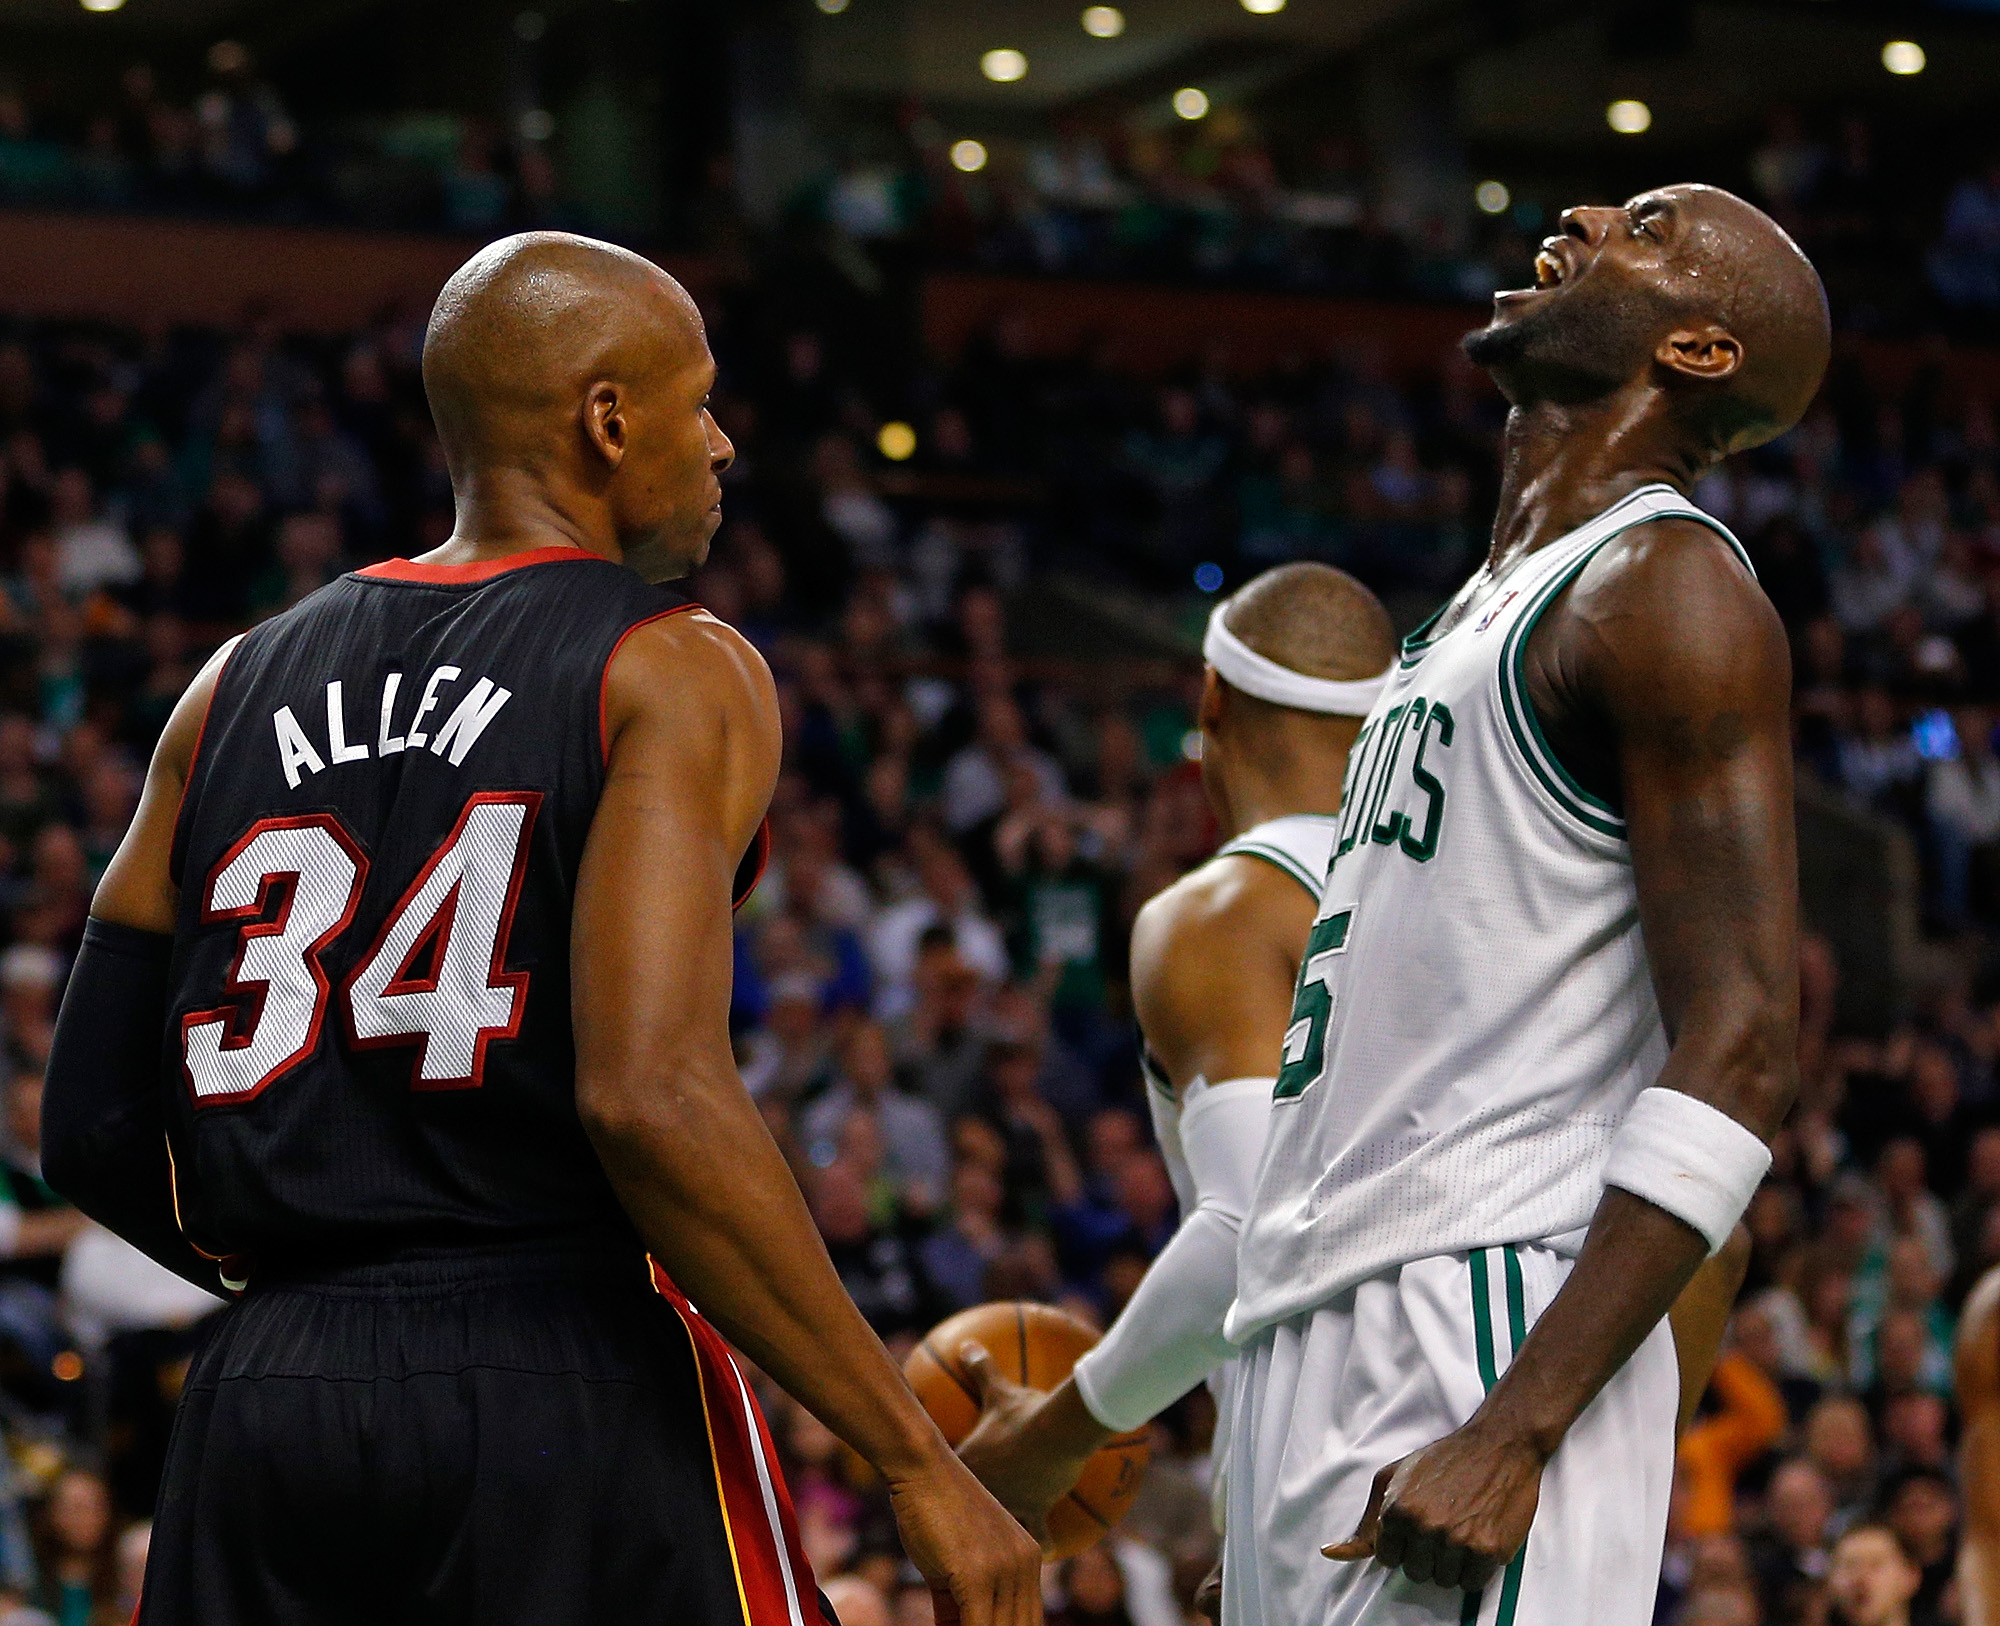 Boston Celtics power forward Kevin Garnett, right, reacts after being called for a foul against Miami Heat shooting guard Ray Allen.